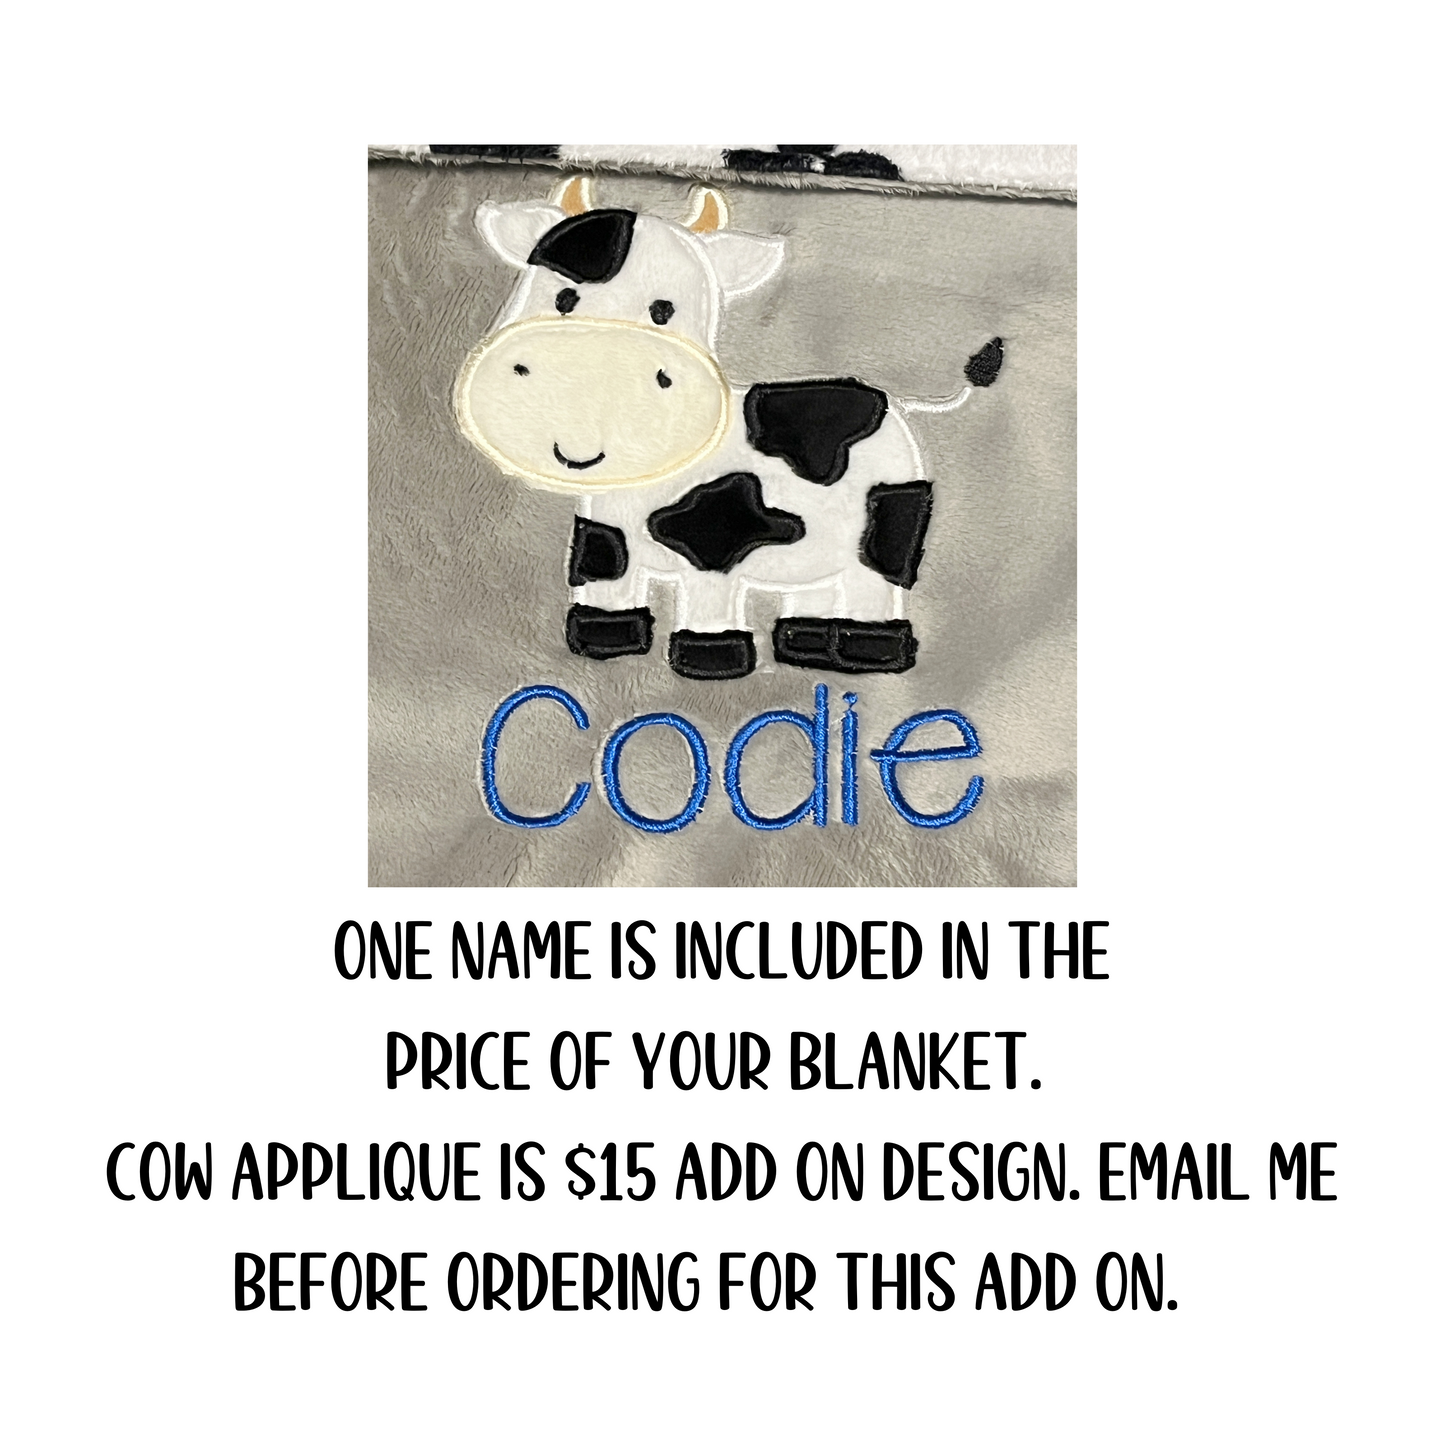 Cow applique add on is $15 extra. One name is included in the price of the blanket. 